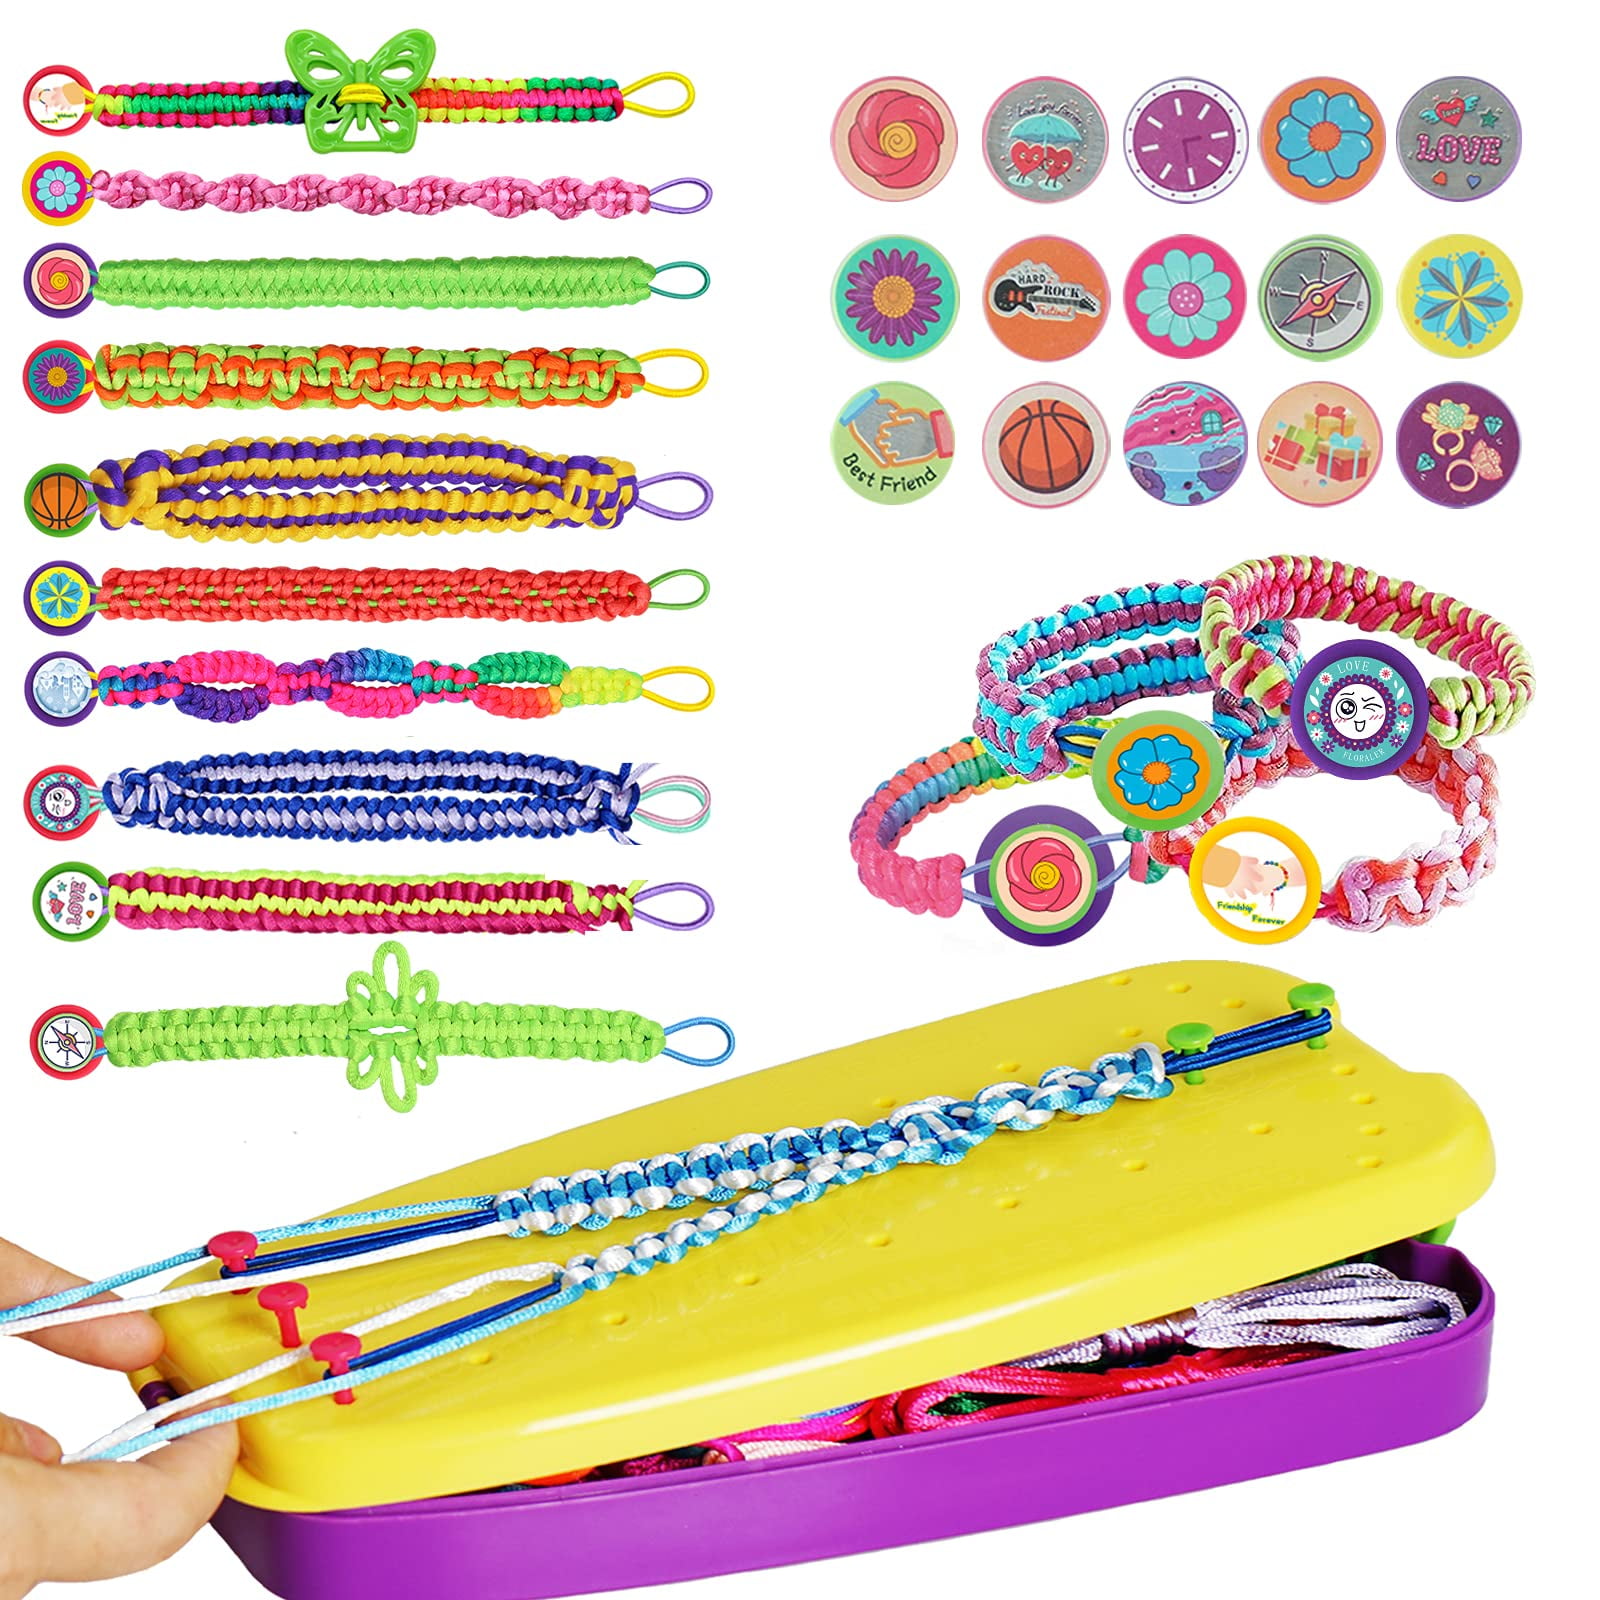 Friendship Bracelet Making Kit Toys, DIY Crafts for Girls Ages 8-12,  Hottest Birthday Christmas Gifts for 7 8 9 10 11 12 Years Old Kids, Travel  Activities Party Favor Holiday Gift Guide